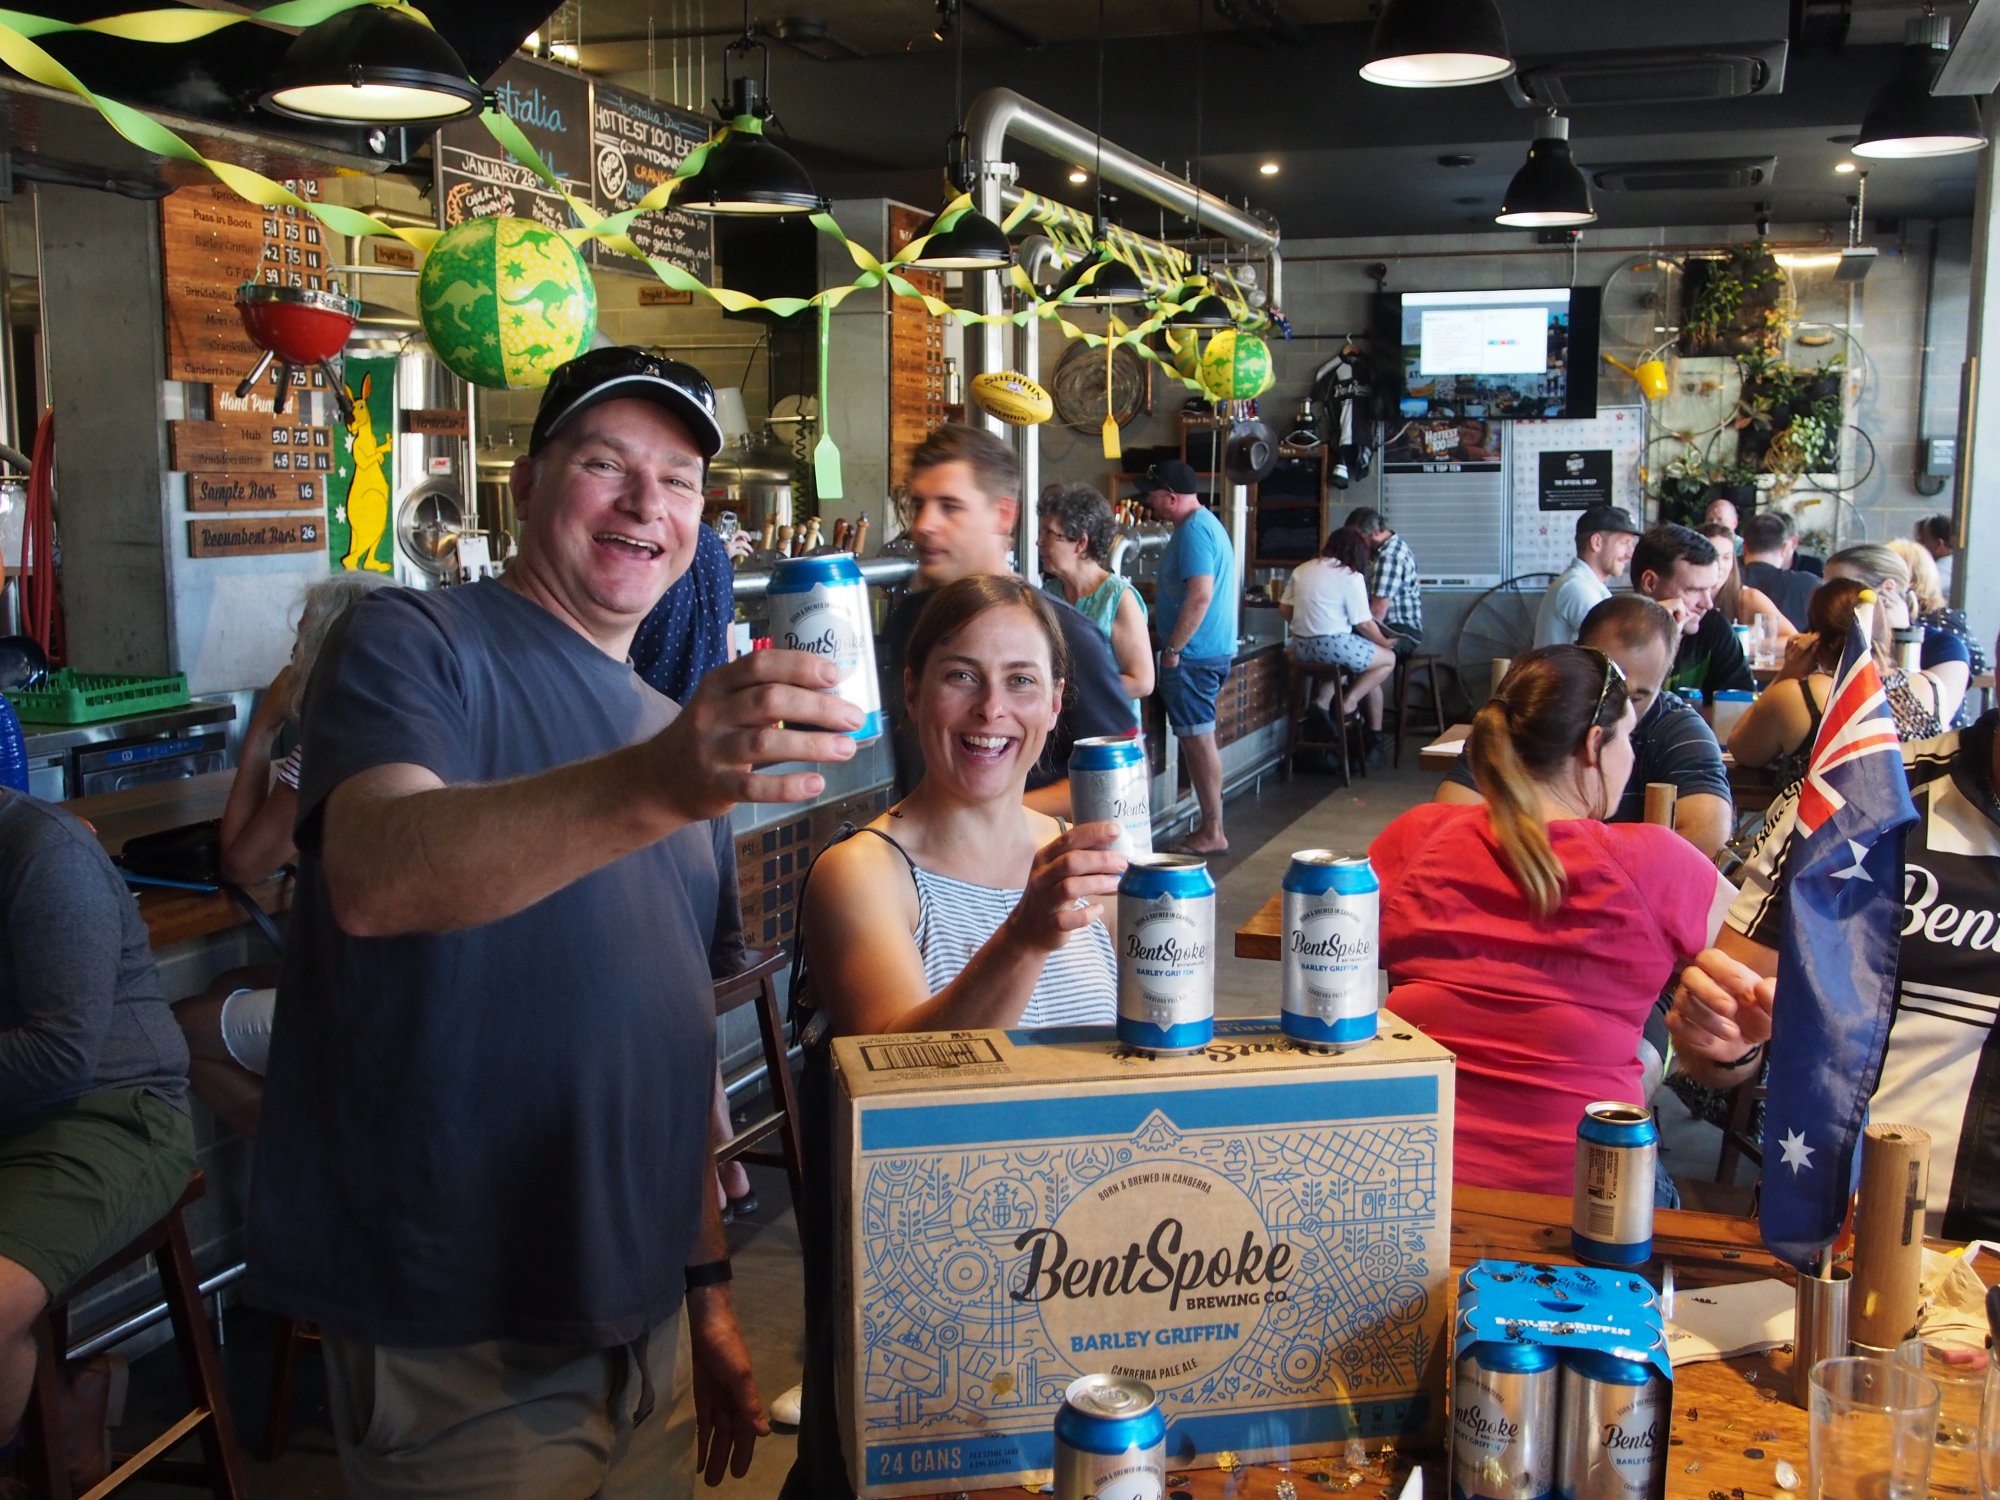 Bentspoke nails 8th, 19th spots in Hottest 100 beers poll